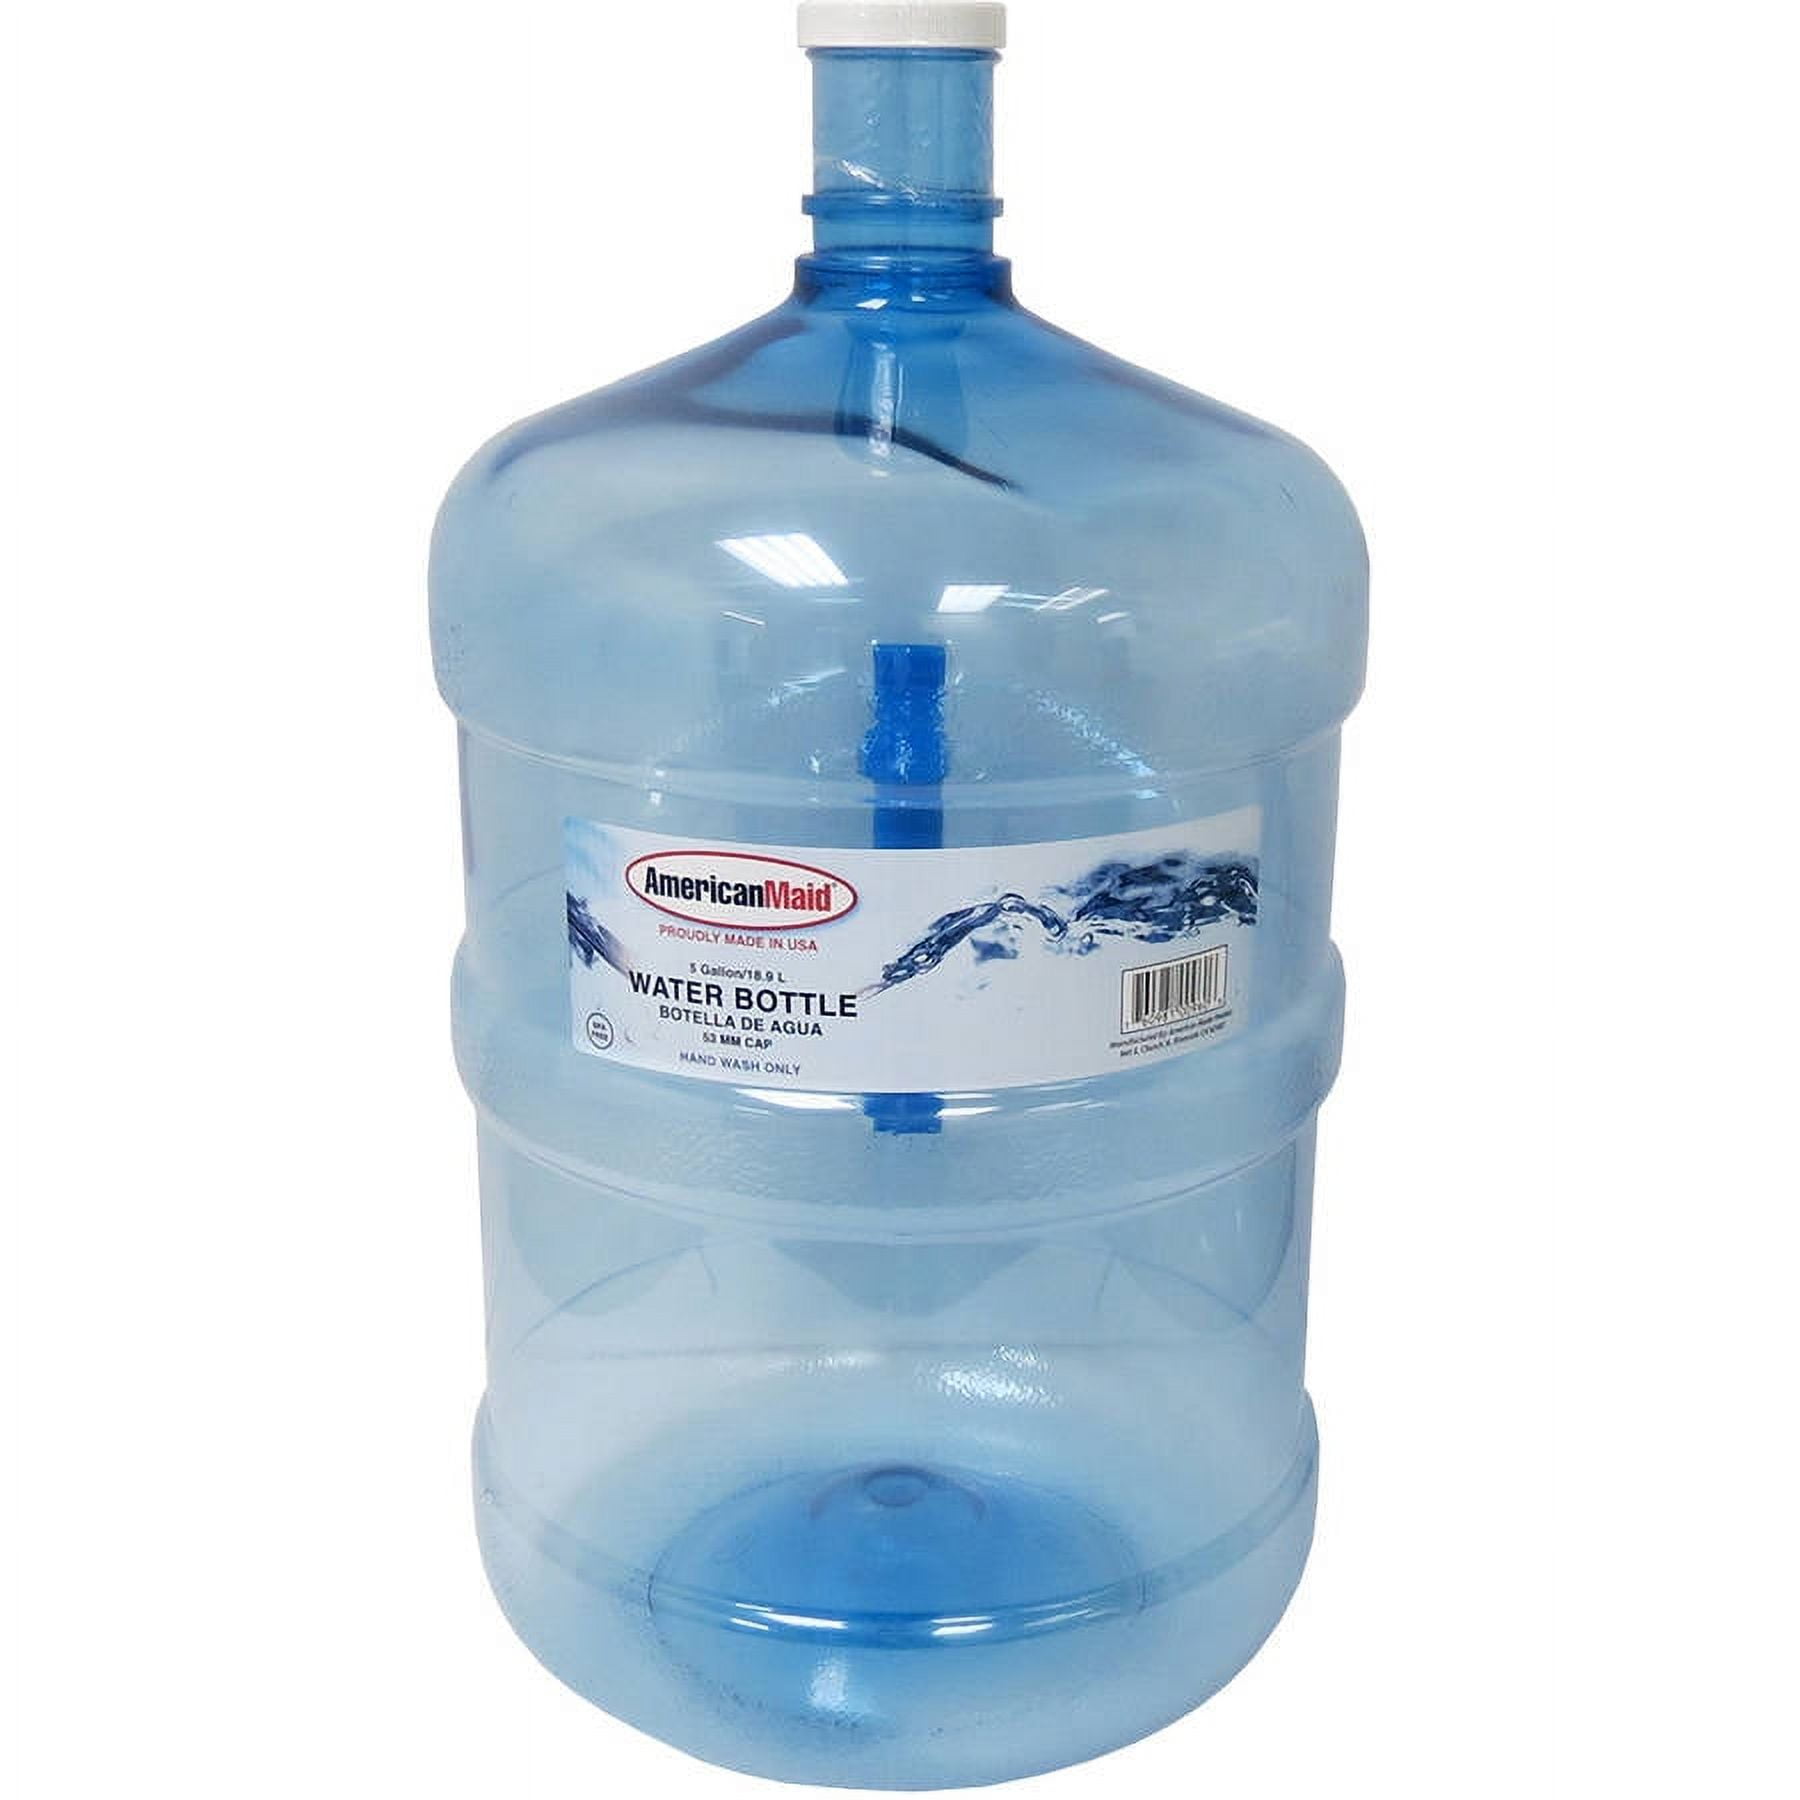 Wholesale botella agua to Store, Carry and Keep Water Handy 